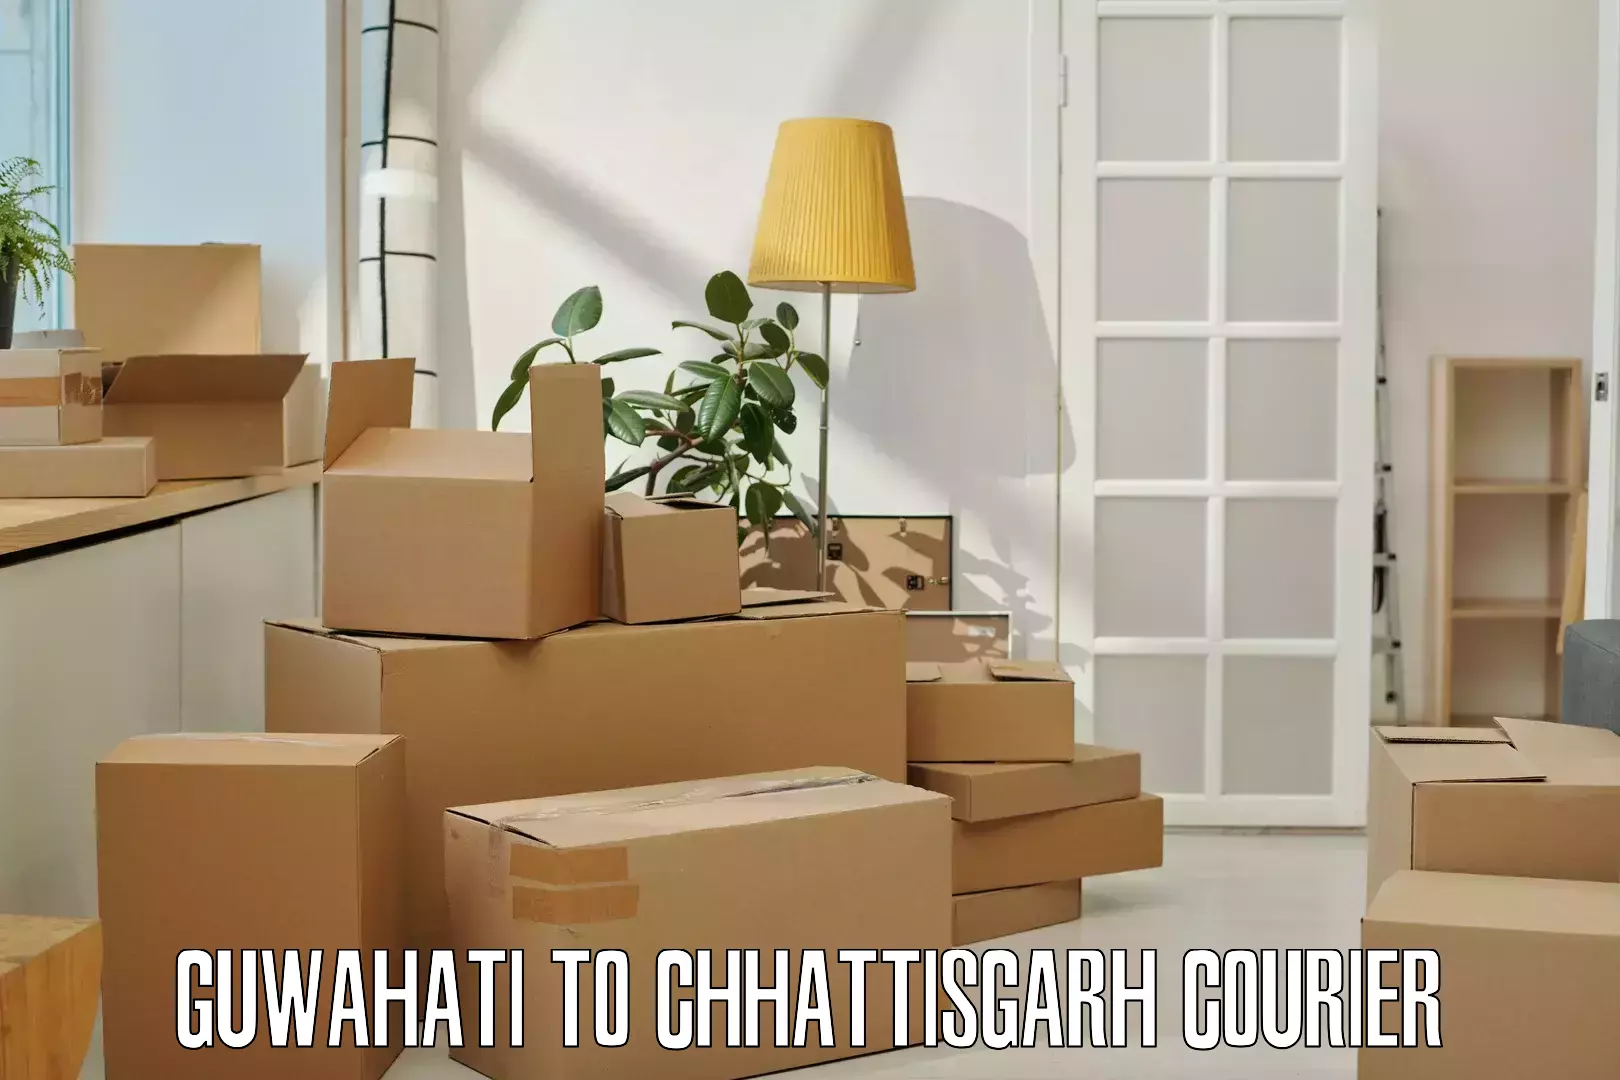 Quality courier services Guwahati to Raigarh